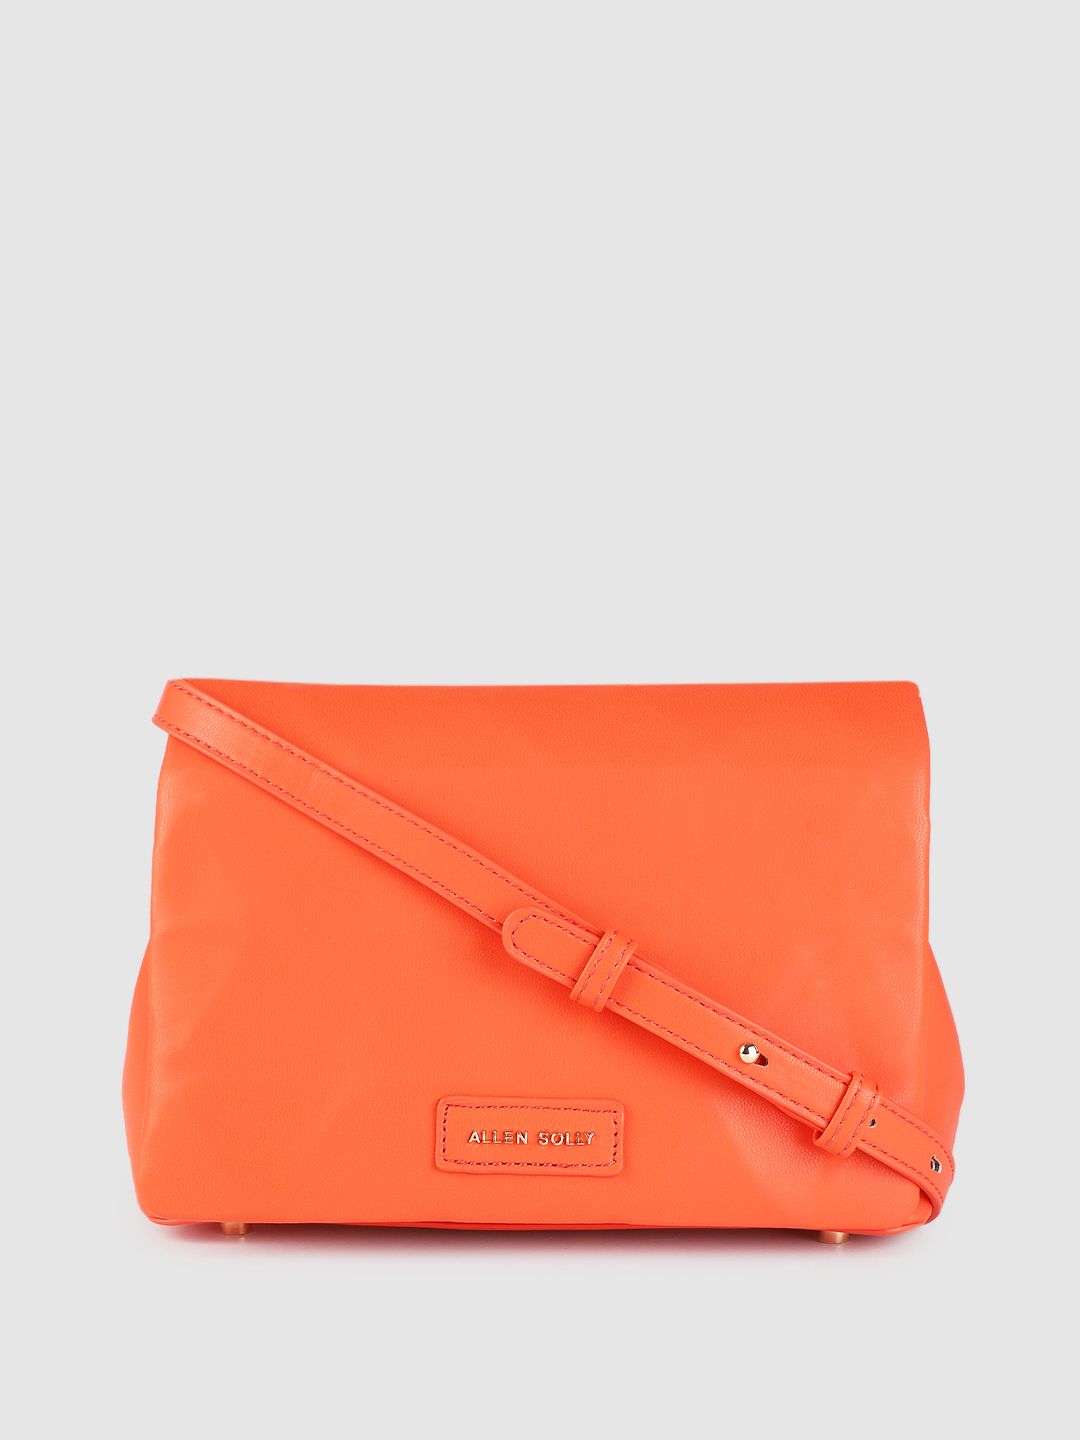 Allen Solly Orange Solid Structured Sling Bag Price in India